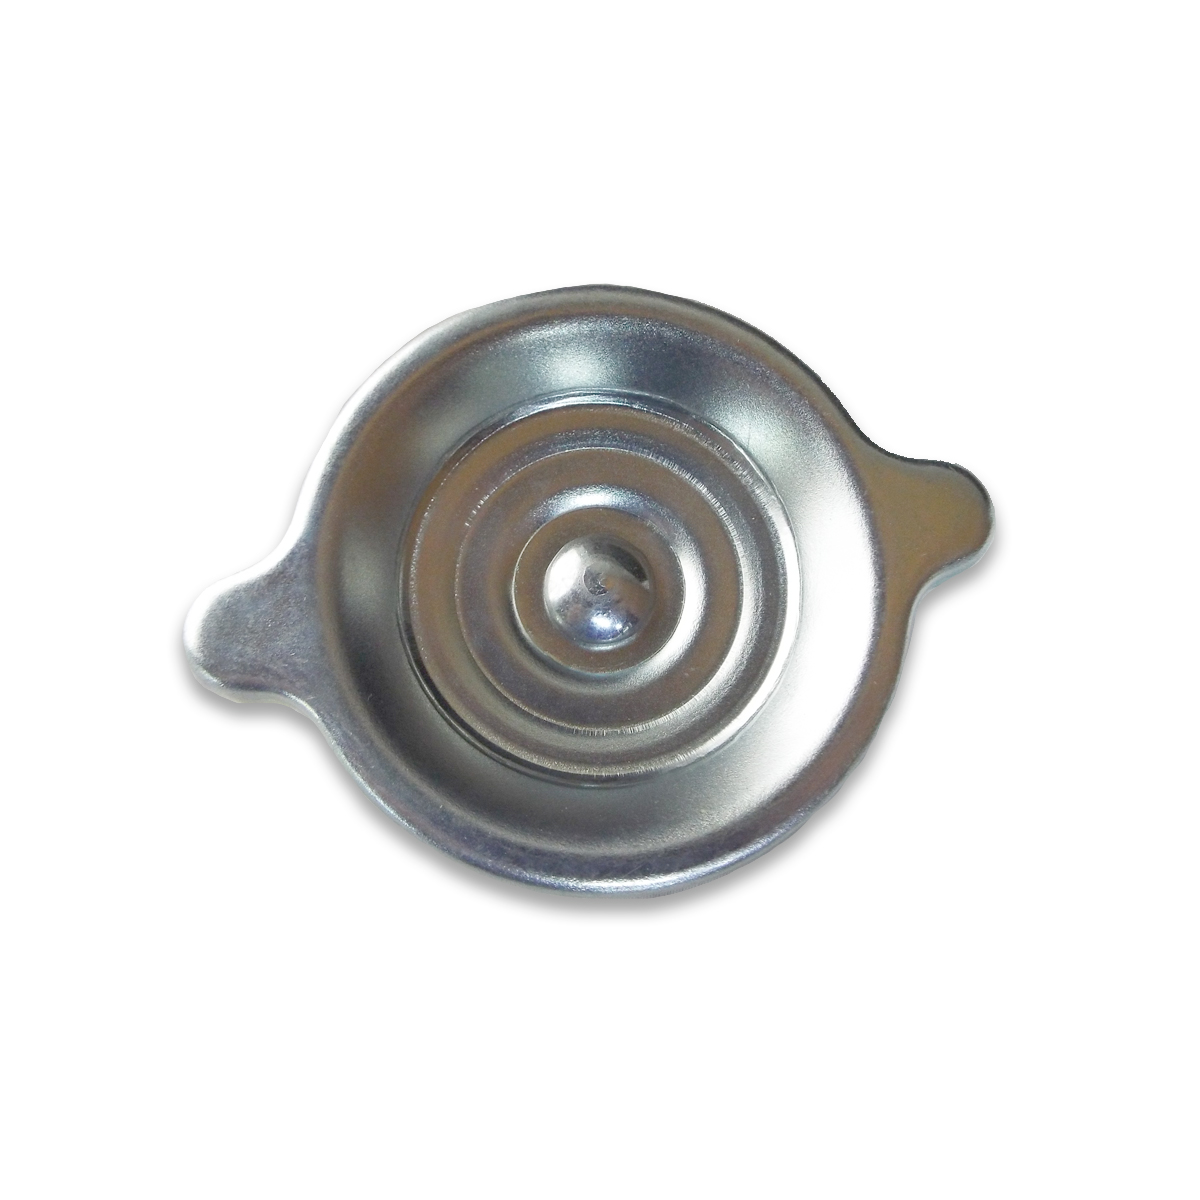 1949-1955 Oil Cap Fits on Valve Cover and Seals Chevrolet and GMC Pickup Truck